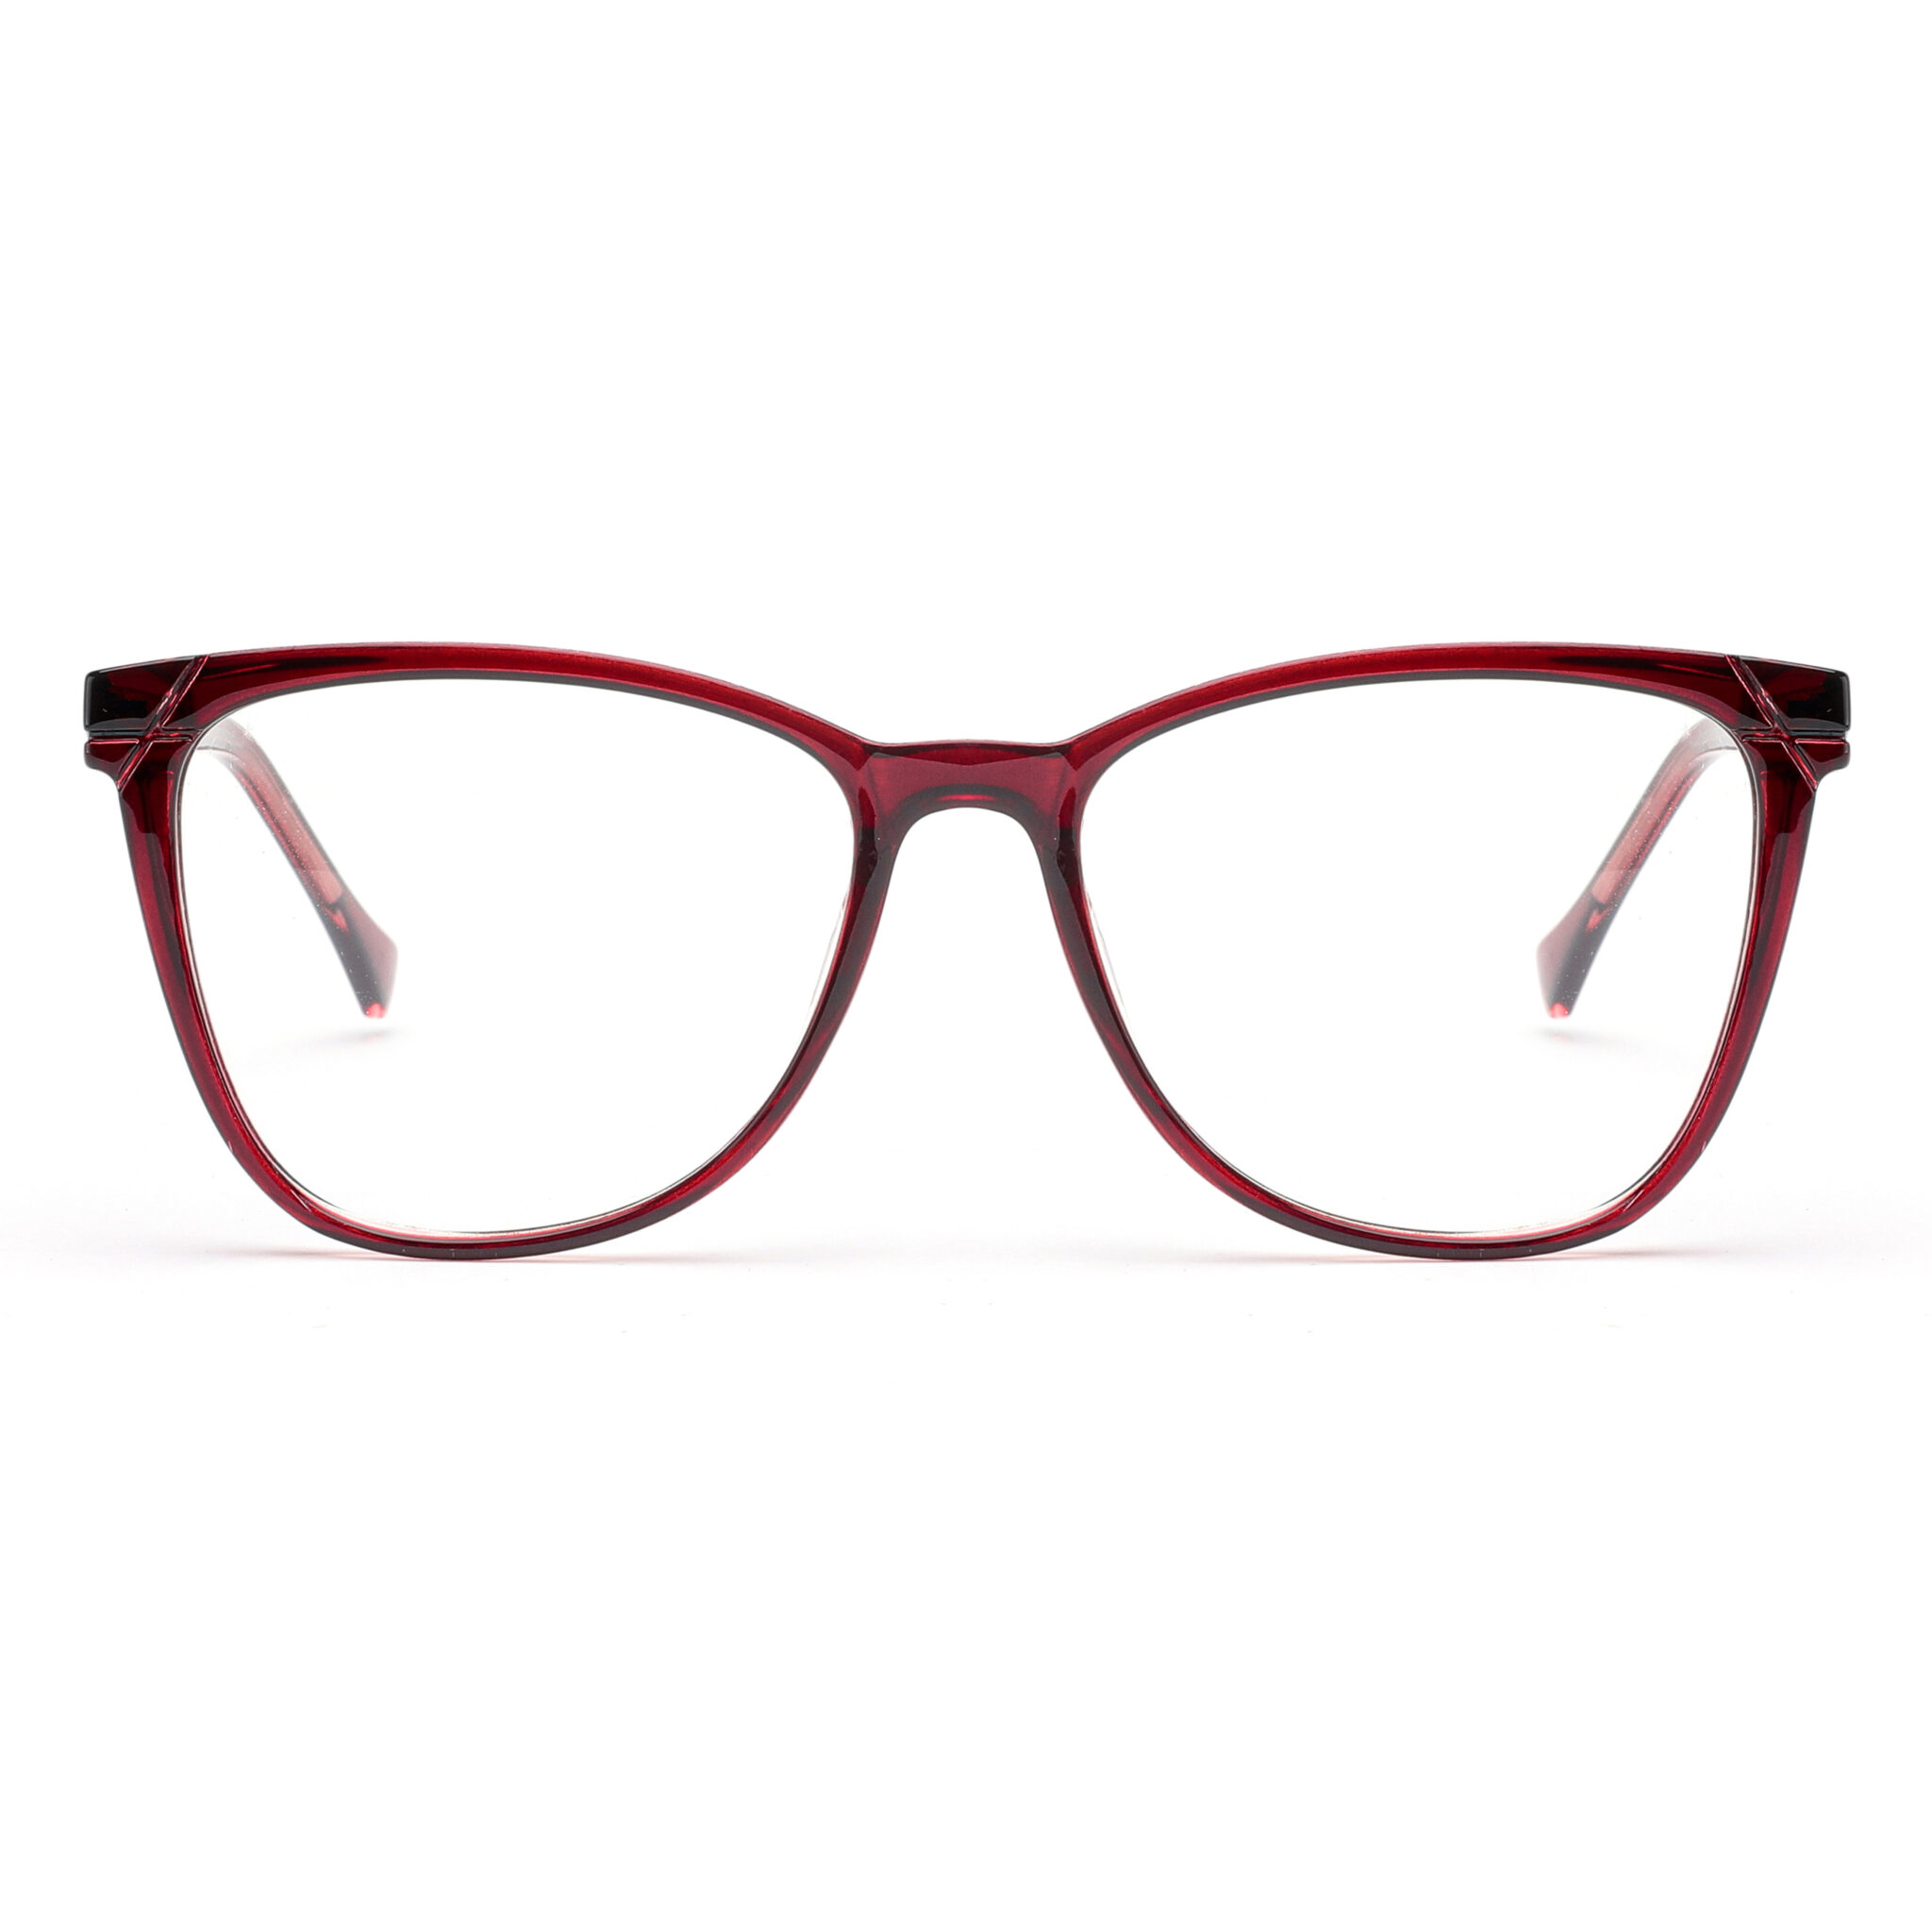 Wholesale Lady Spectacles Frame